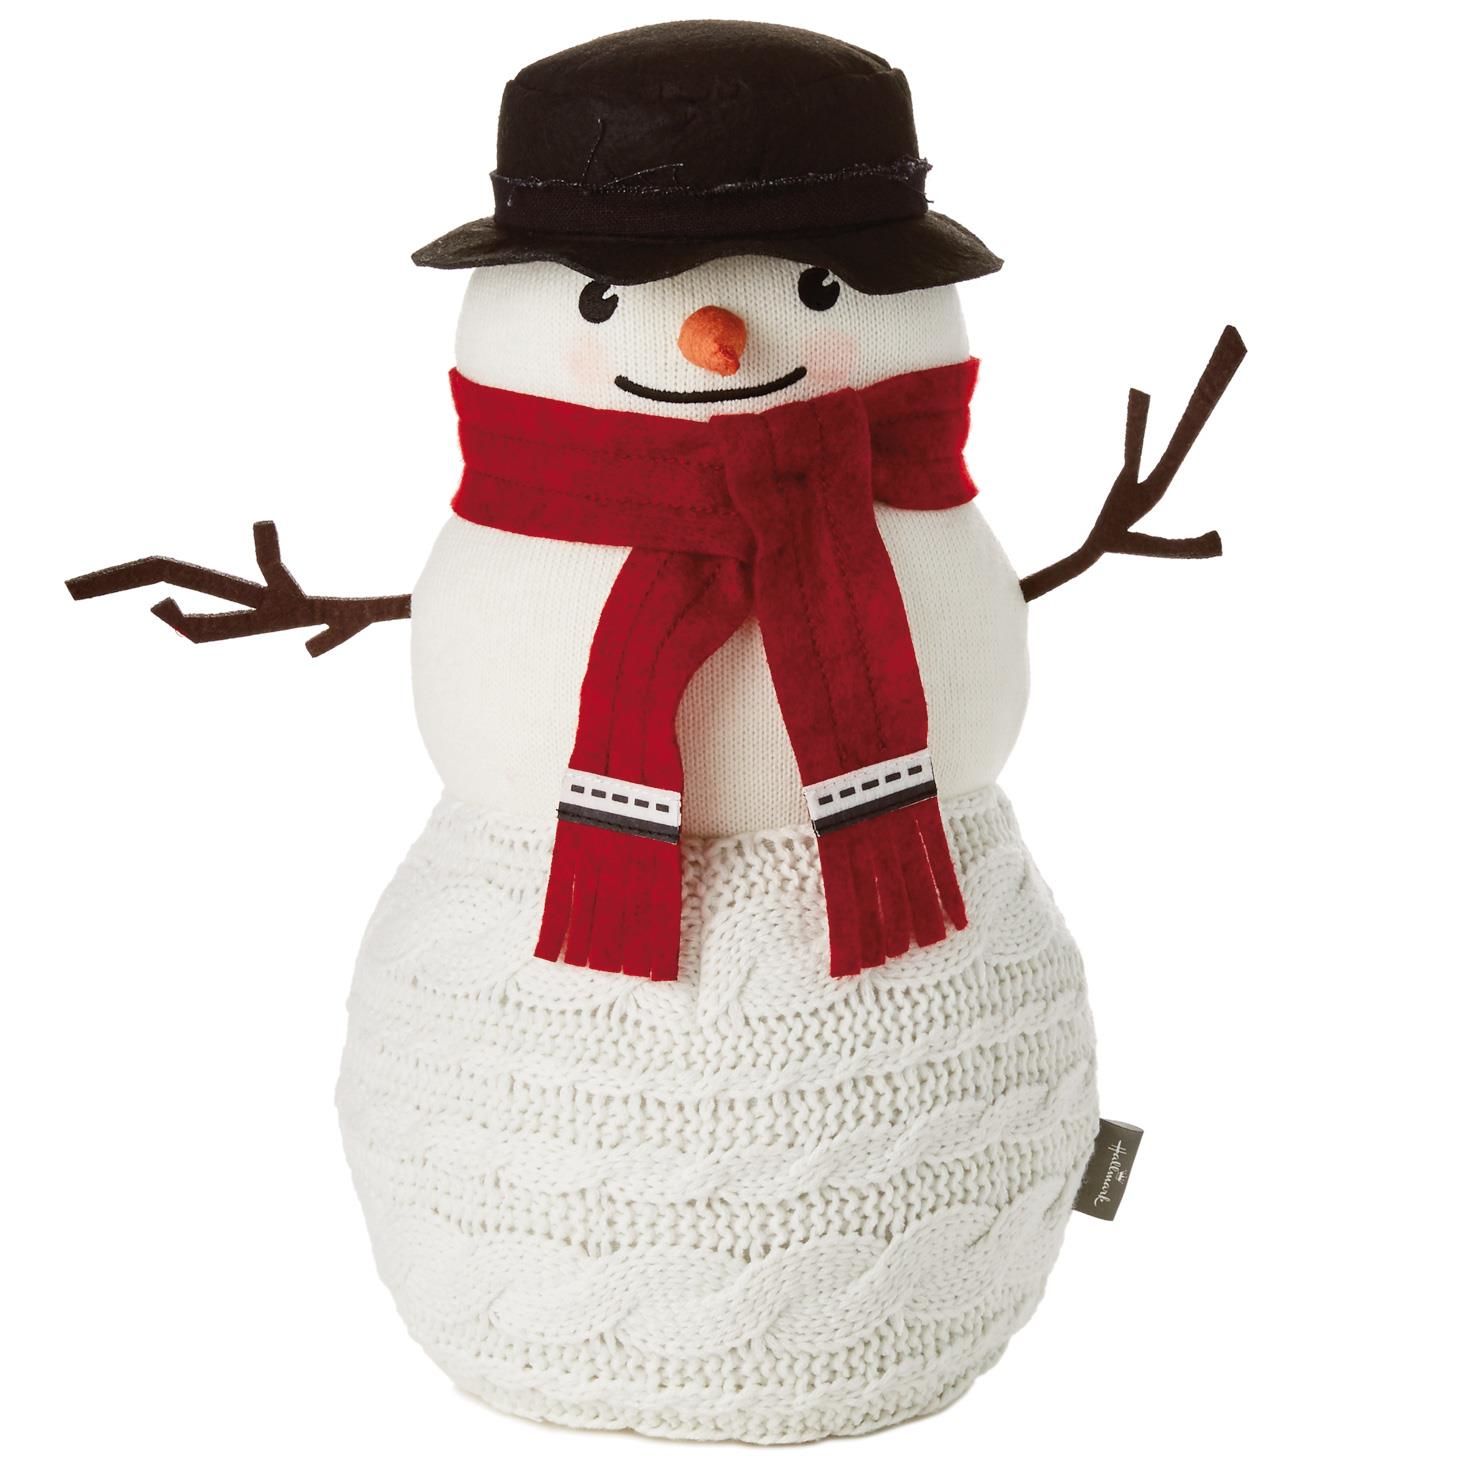 Large Cable-Knit Sweater Snowman Decoration, 15.5